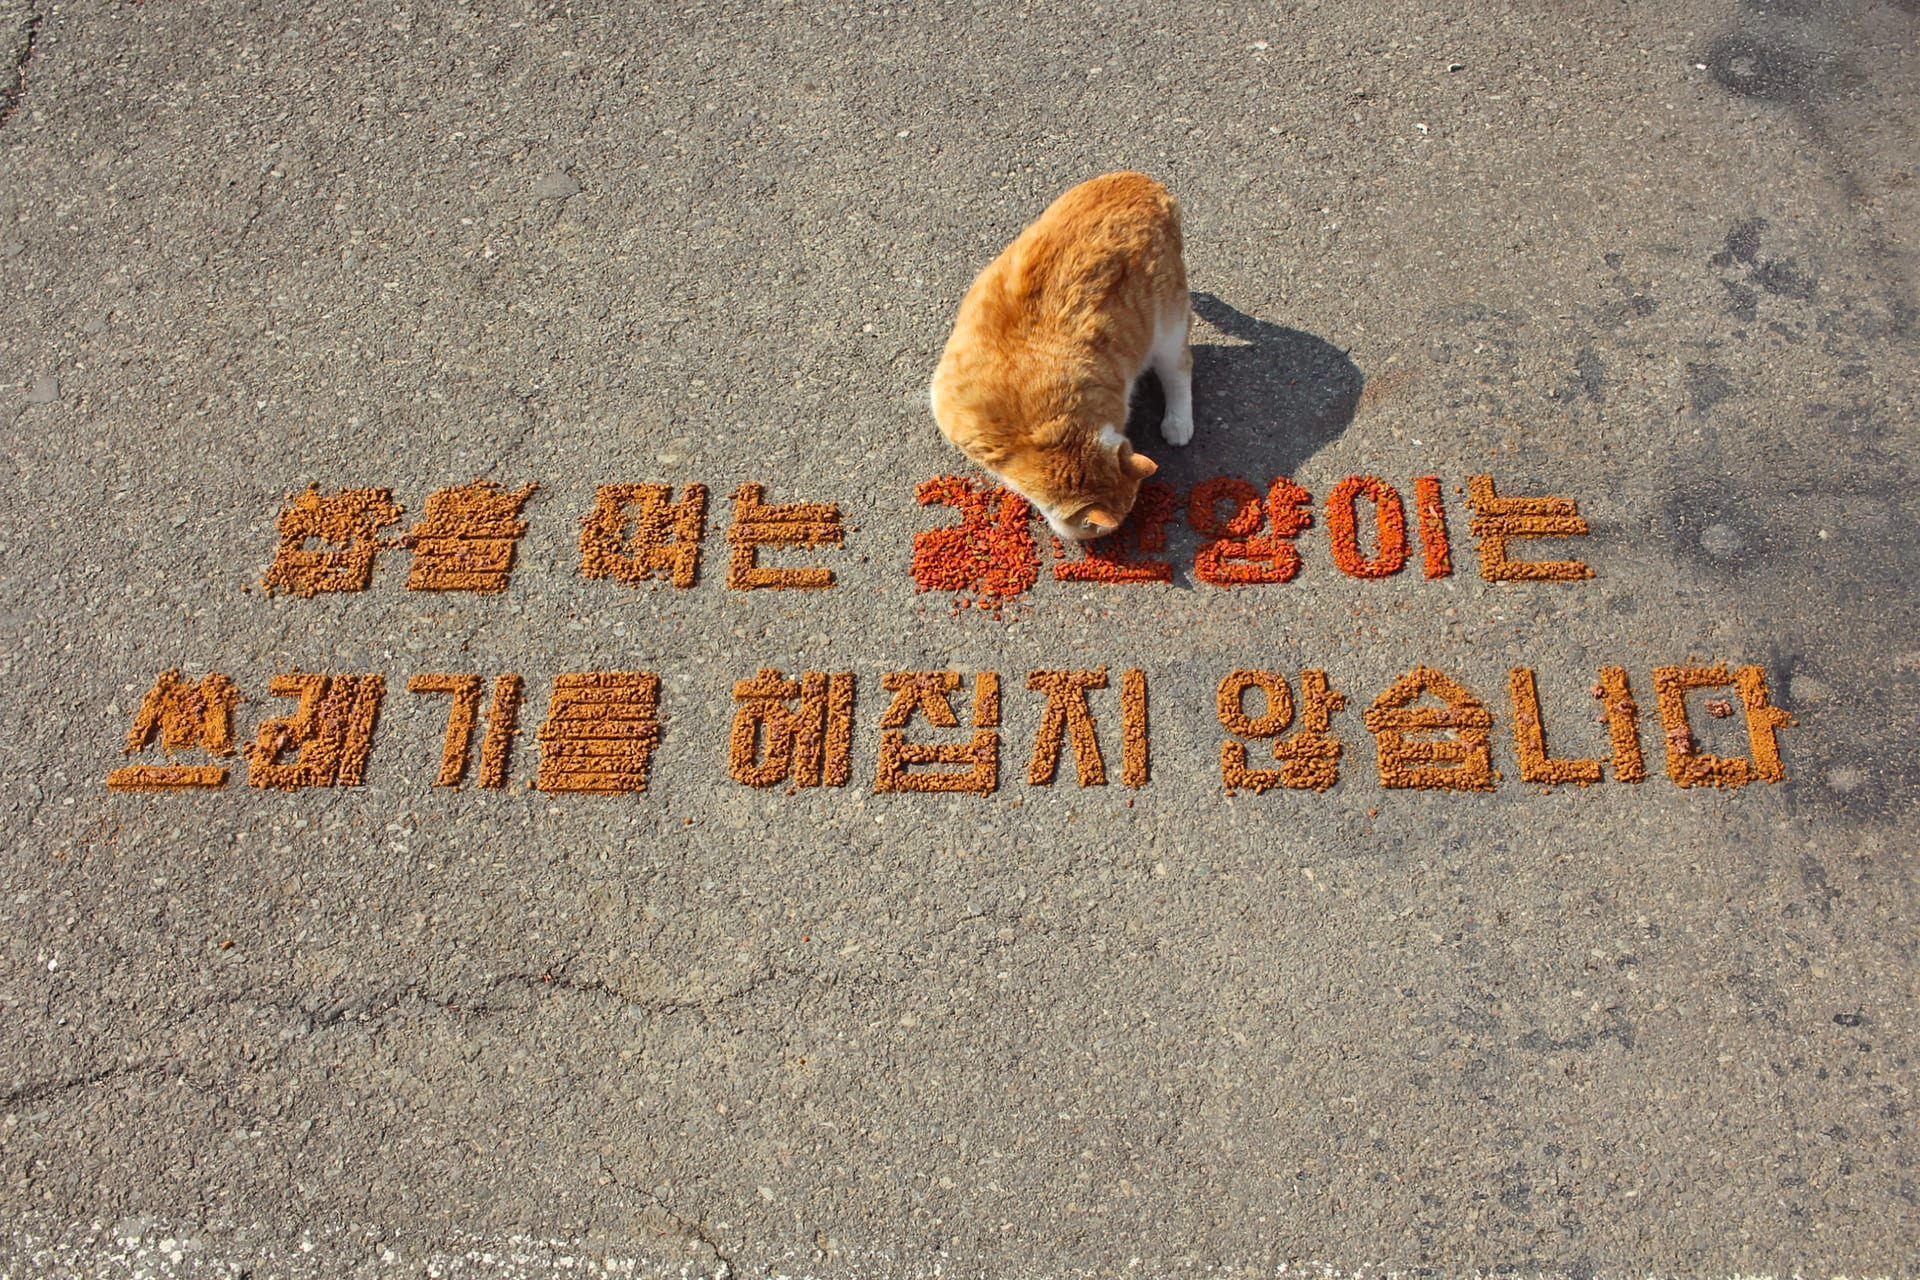 Photograph of a ginger and white cat from above and in front, its head bent as it eats what looks like dried cat food, which has been used to form letters on the concrete ground in front of it. 